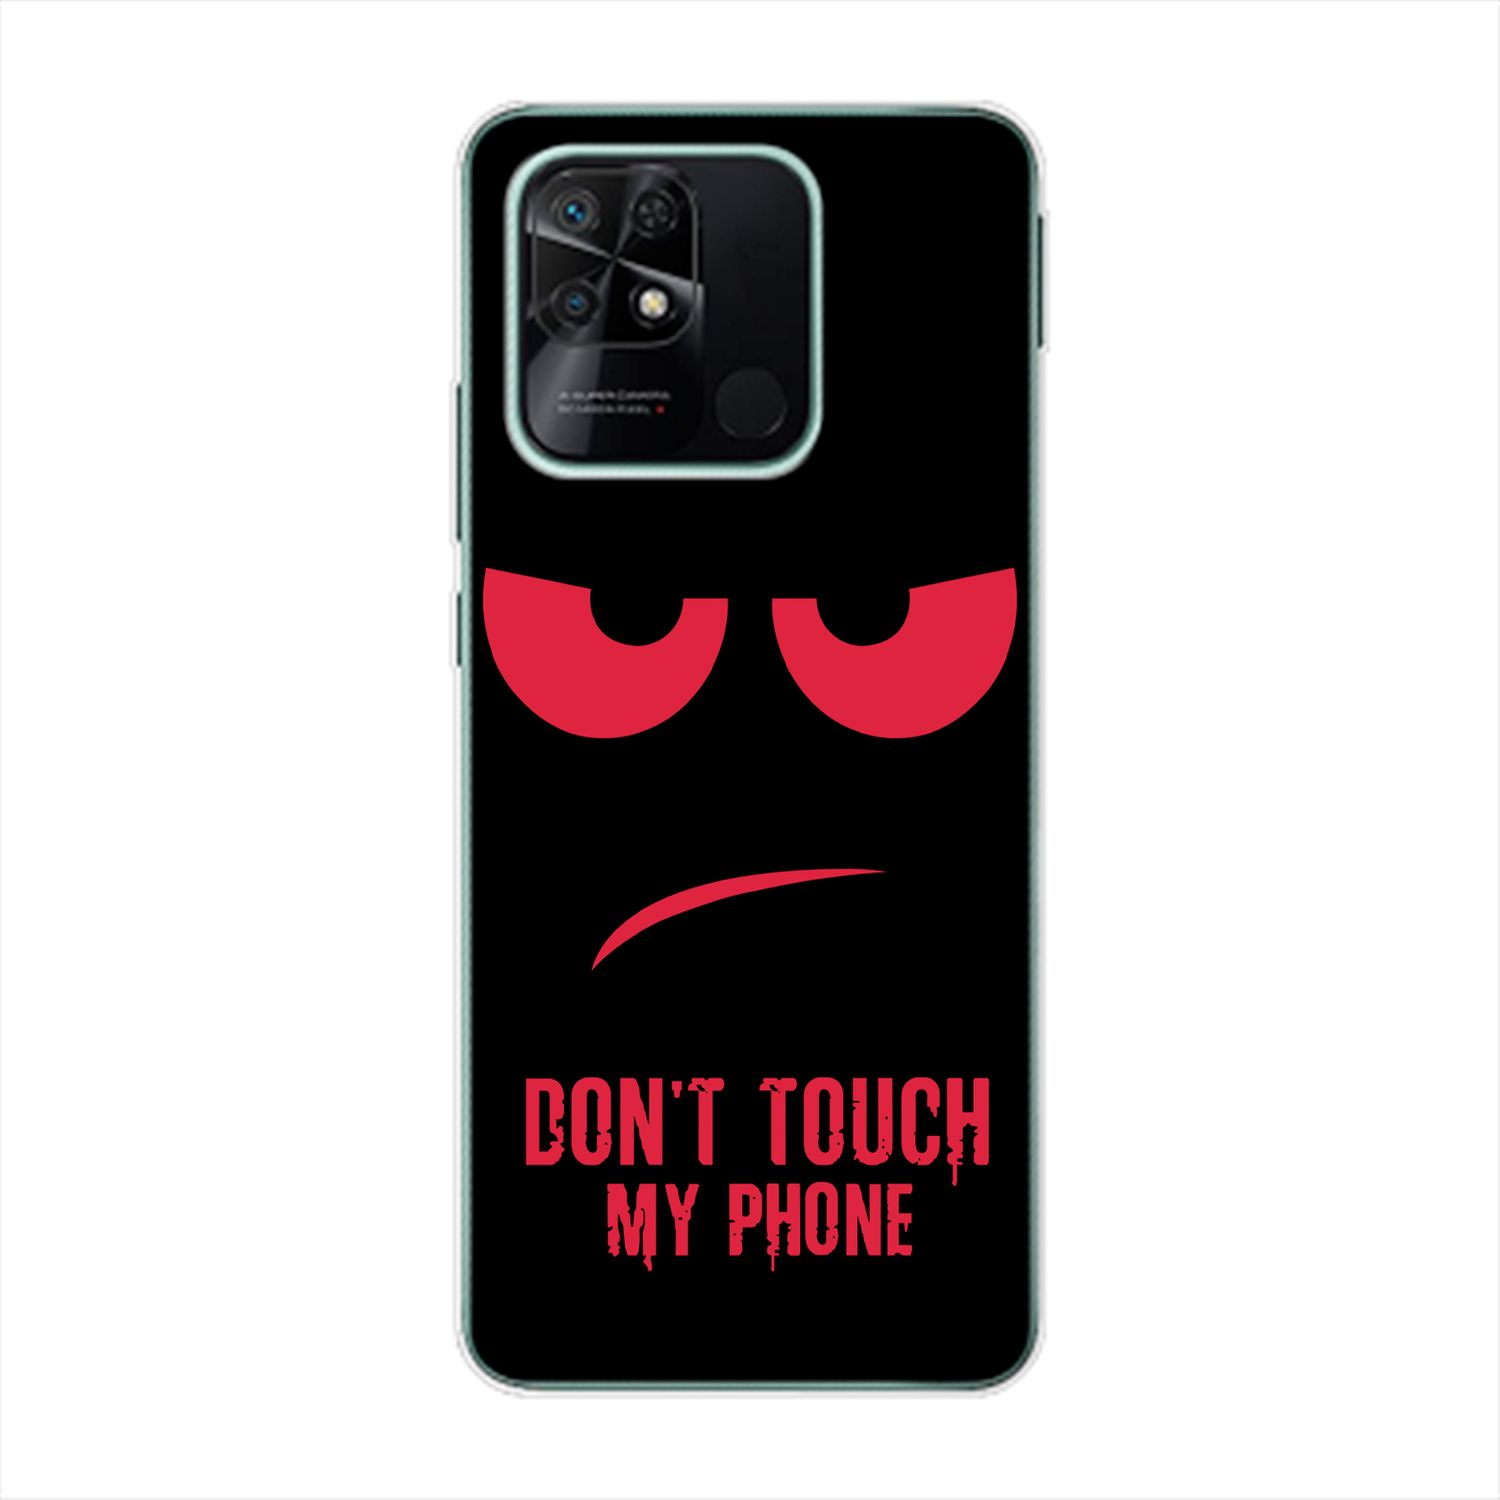 Case, Rot 10C, DESIGN KÖNIG Dont Touch My Xiaomi, Redmi Phone Backcover,